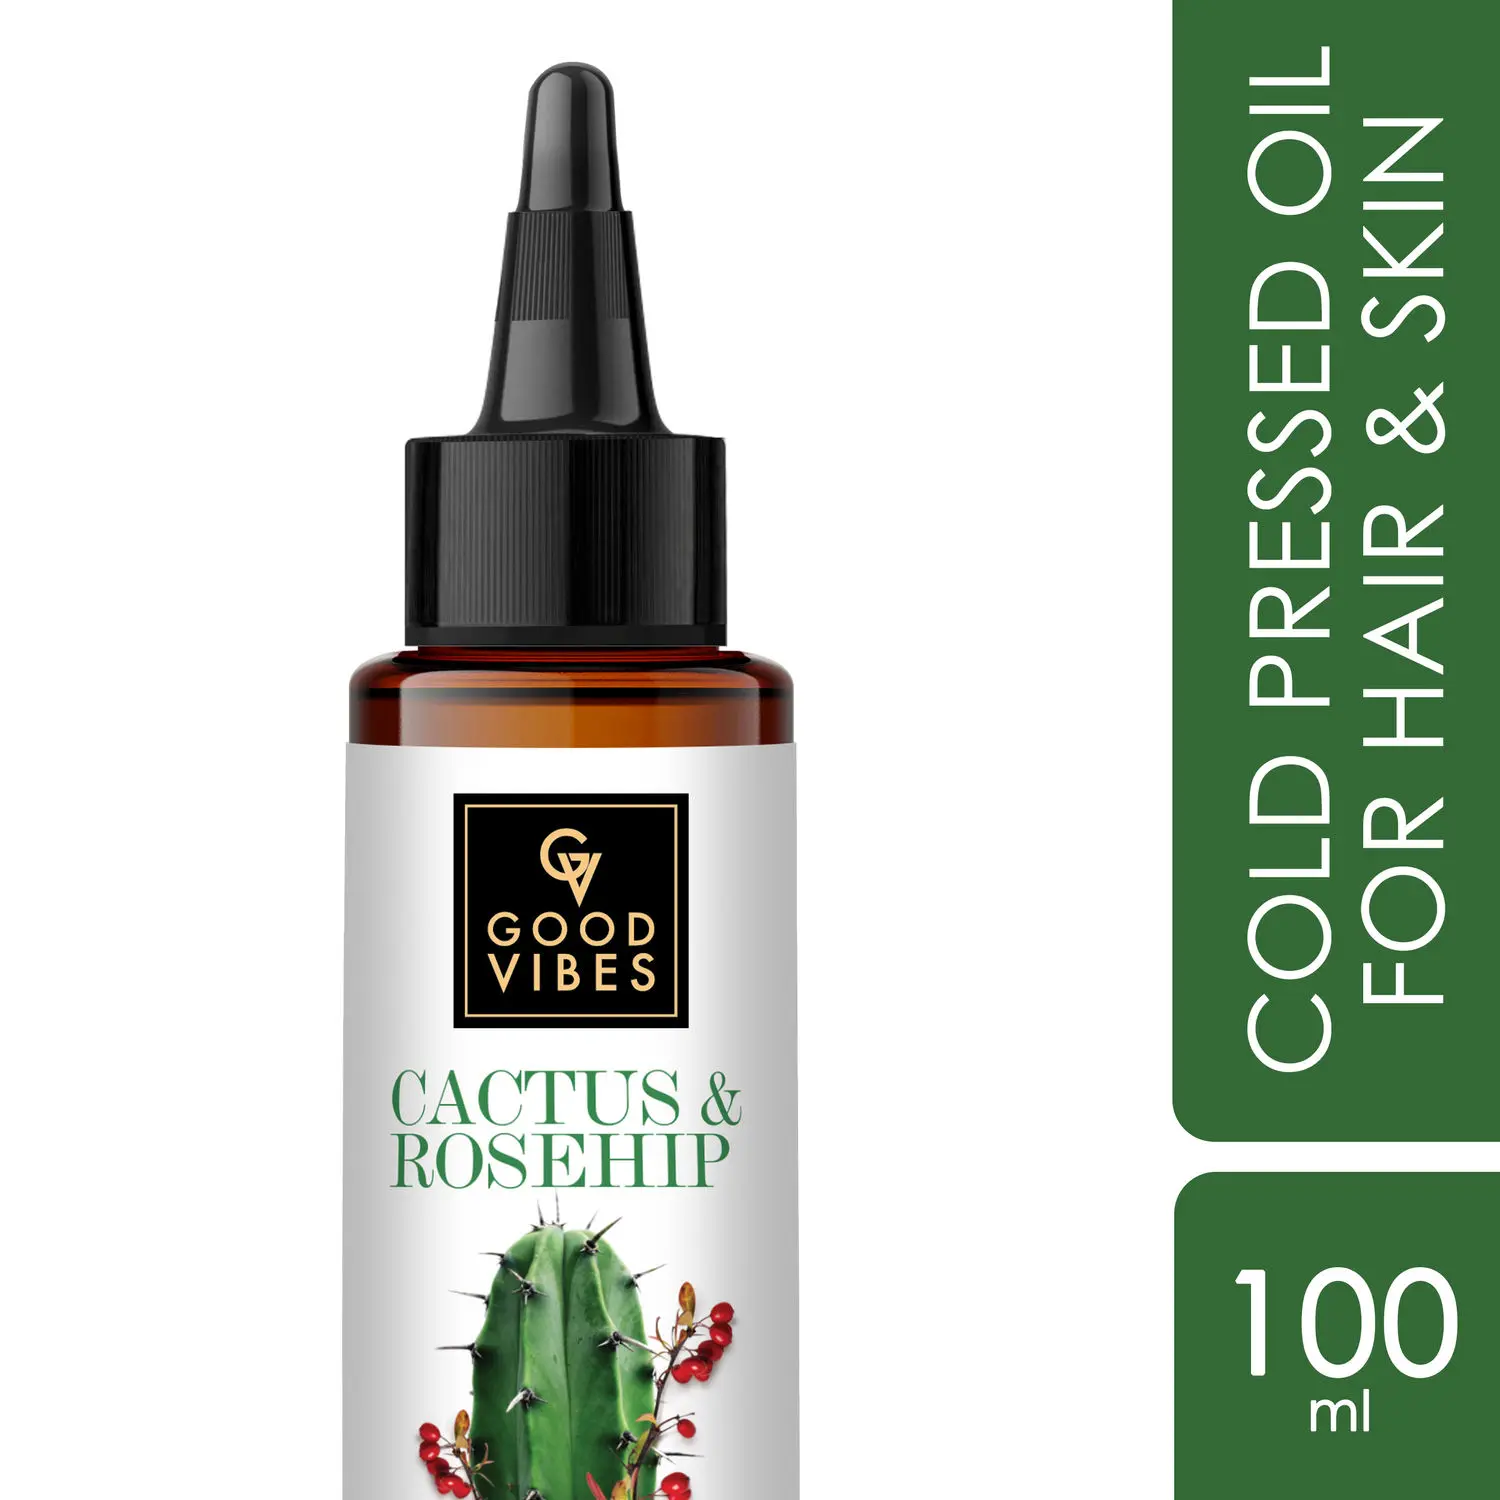 Good Vibes Cactus And Rosehip Cold Pressed Oil For Hair & Skin (100ml)